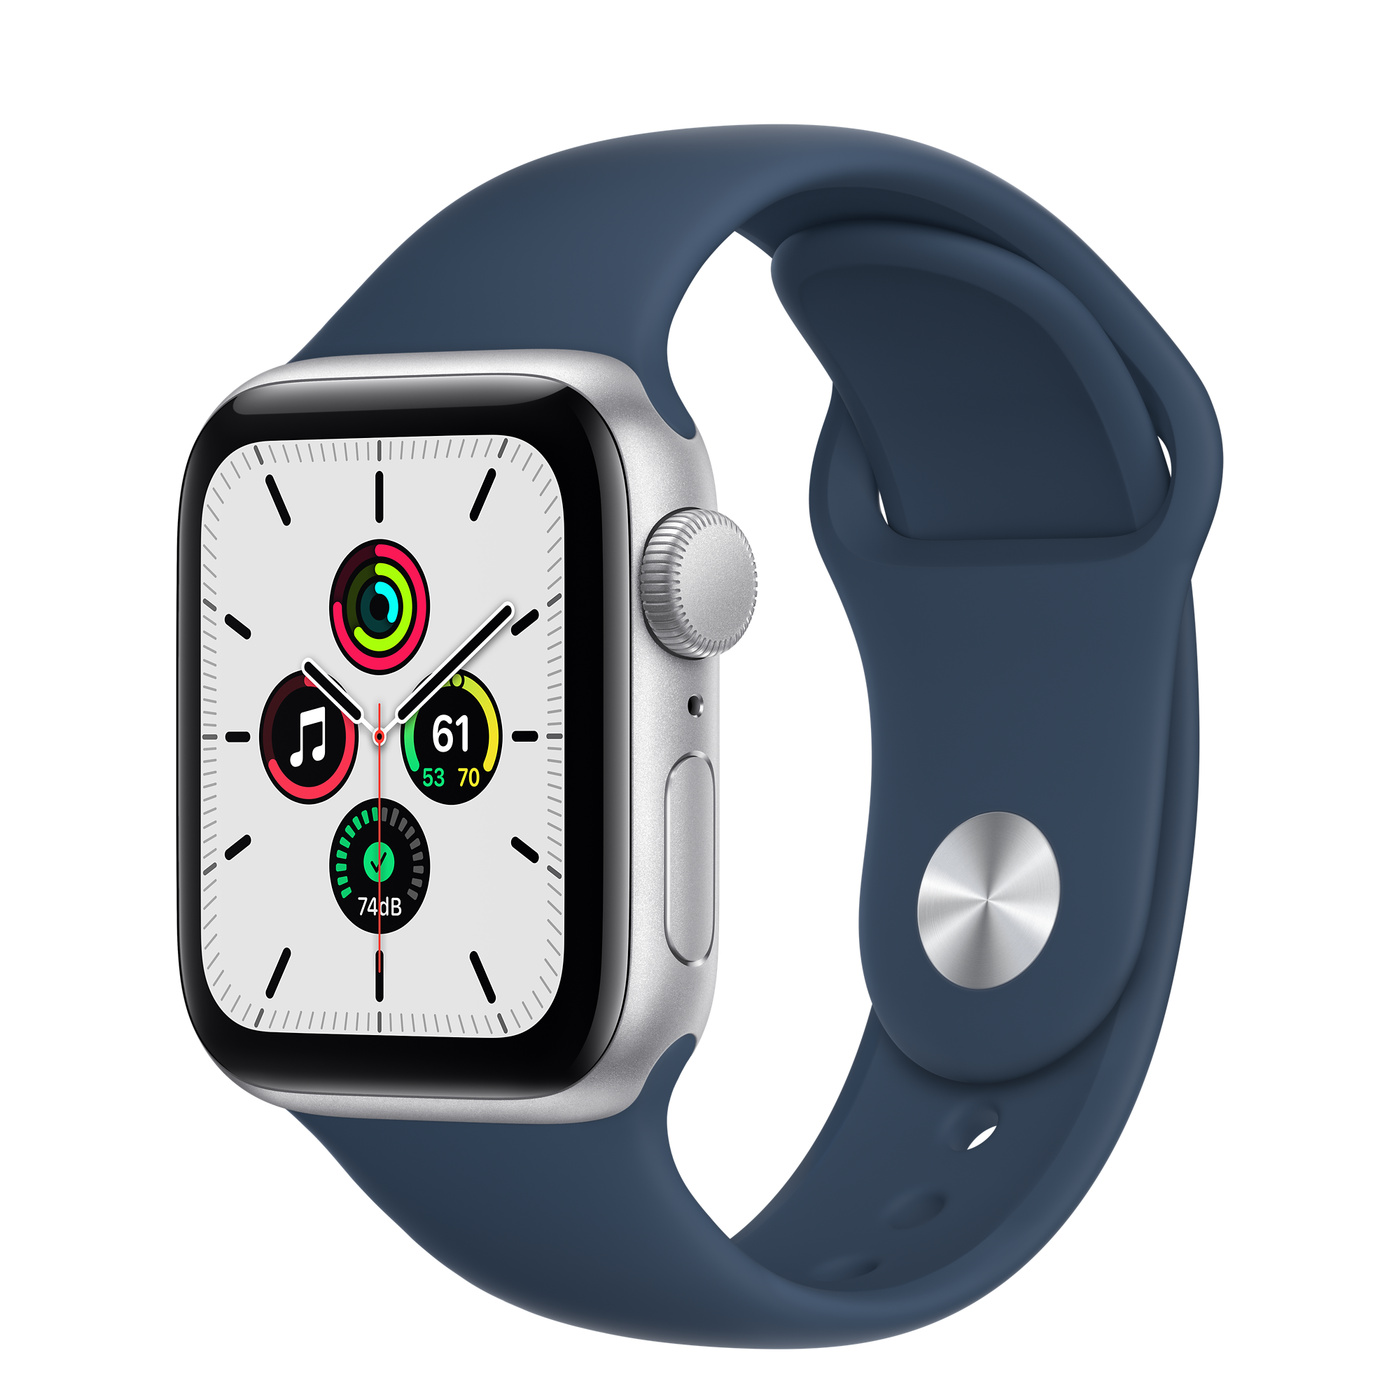 Apple Watch SE GPS, 40mm Silver Aluminum Case with Abyss Blue Sport Band for $219